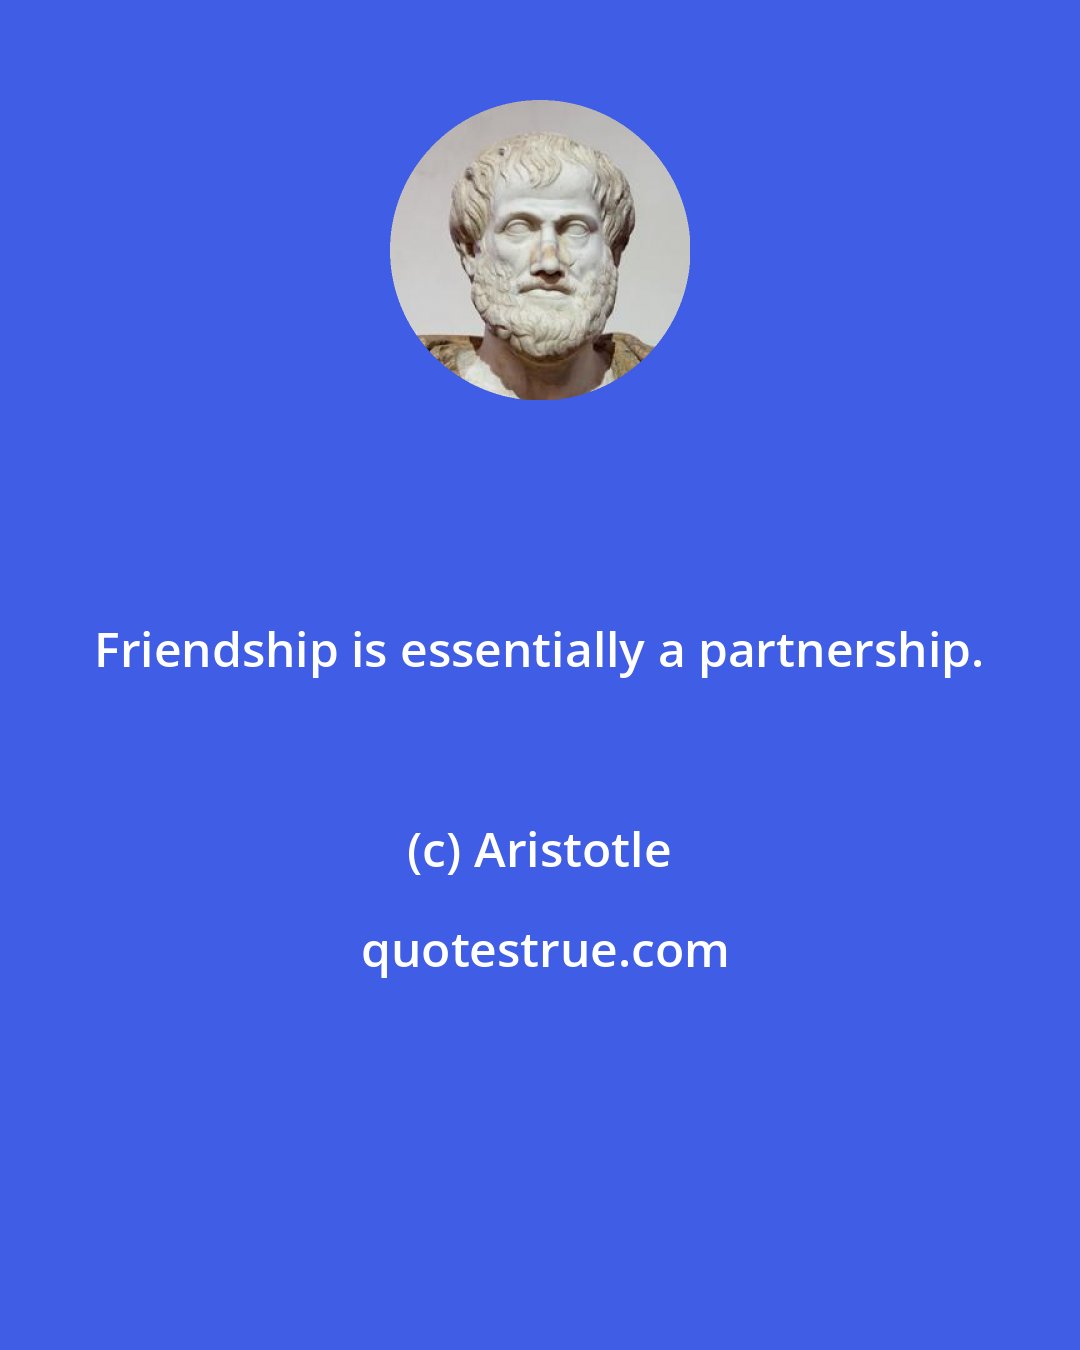 Aristotle: Friendship is essentially a partnership.